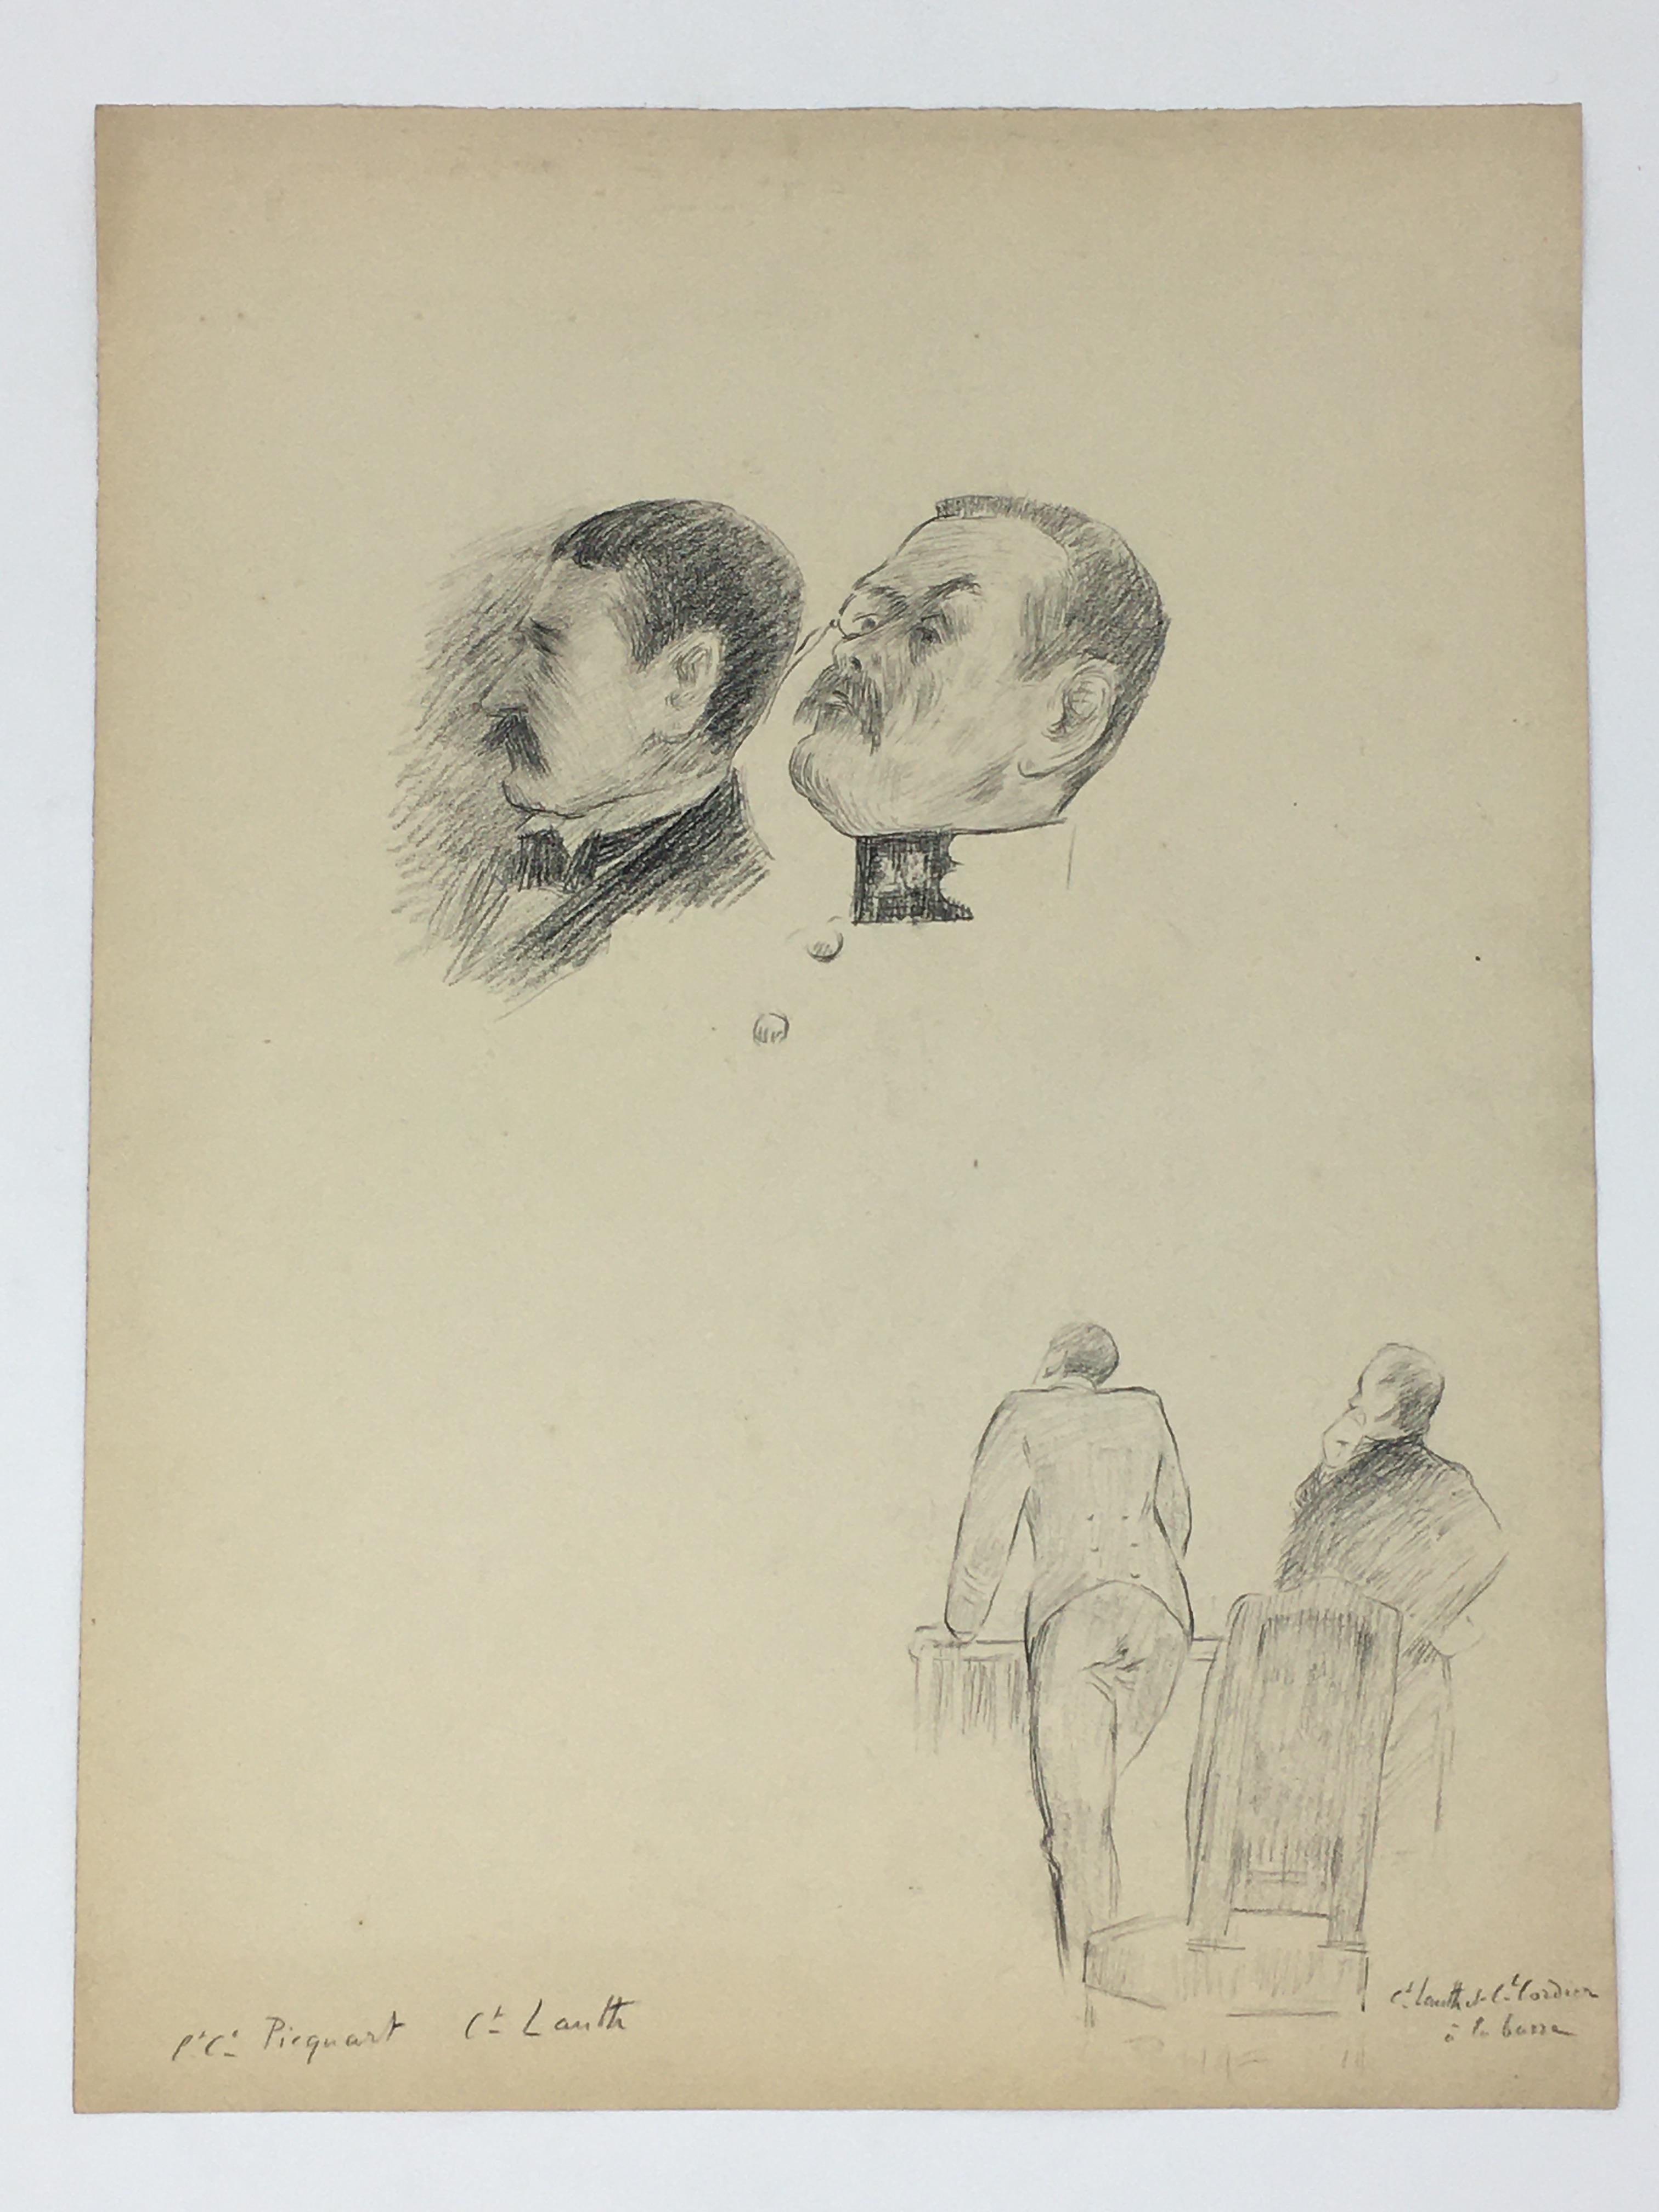 J'Accuse Newspaper, Emile Zola Quote, Signed Dreyfus Portrait, Rare Trial Drawings & Schwartzkoppen - Image 49 of 74